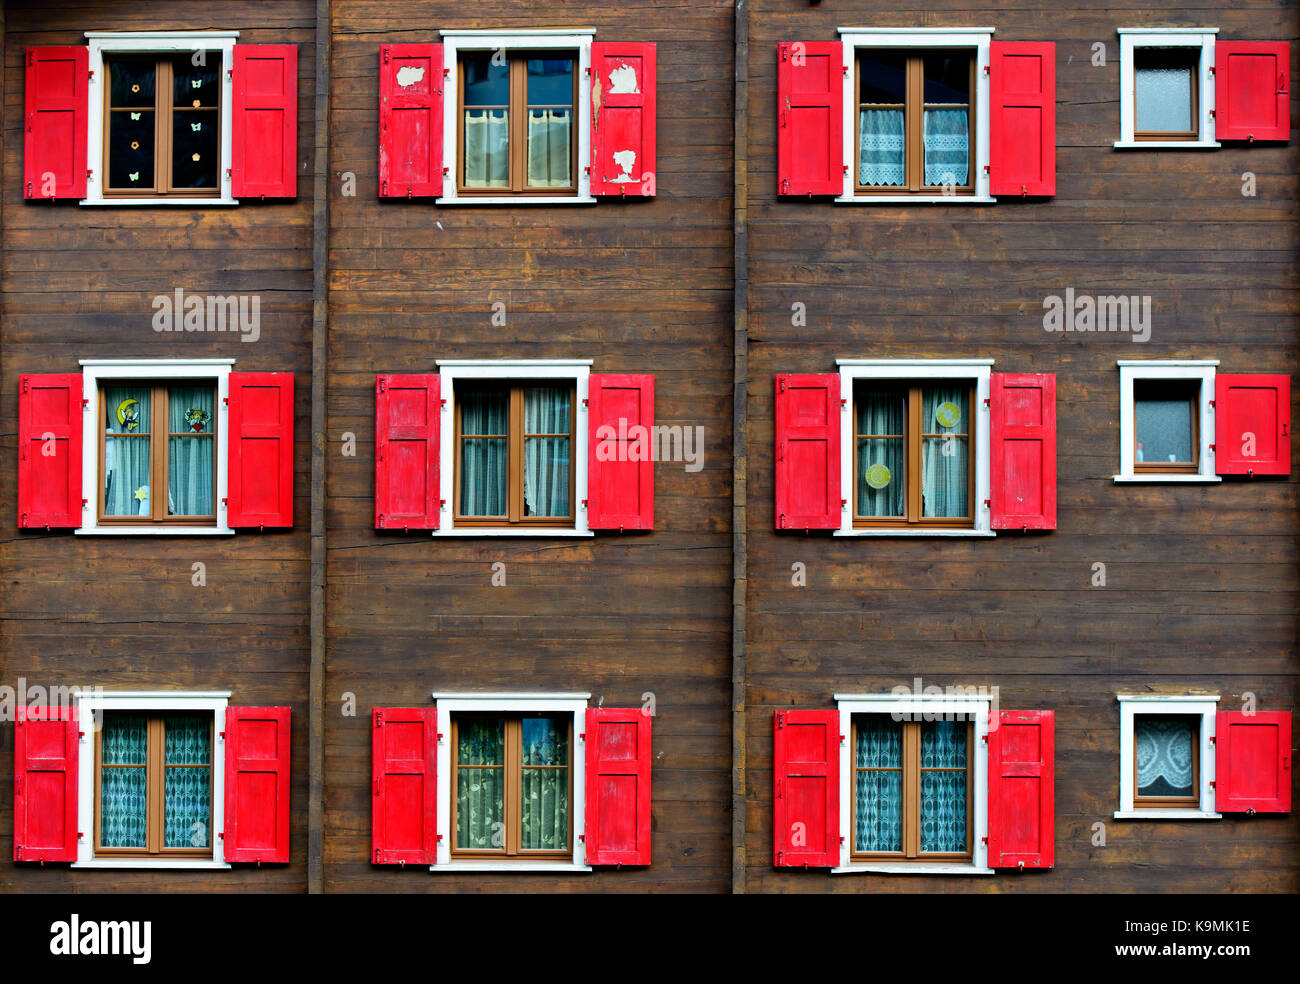 Windows with red shutters on wooden house, Saas-Fee, Valais, Switzerland Stock Photo